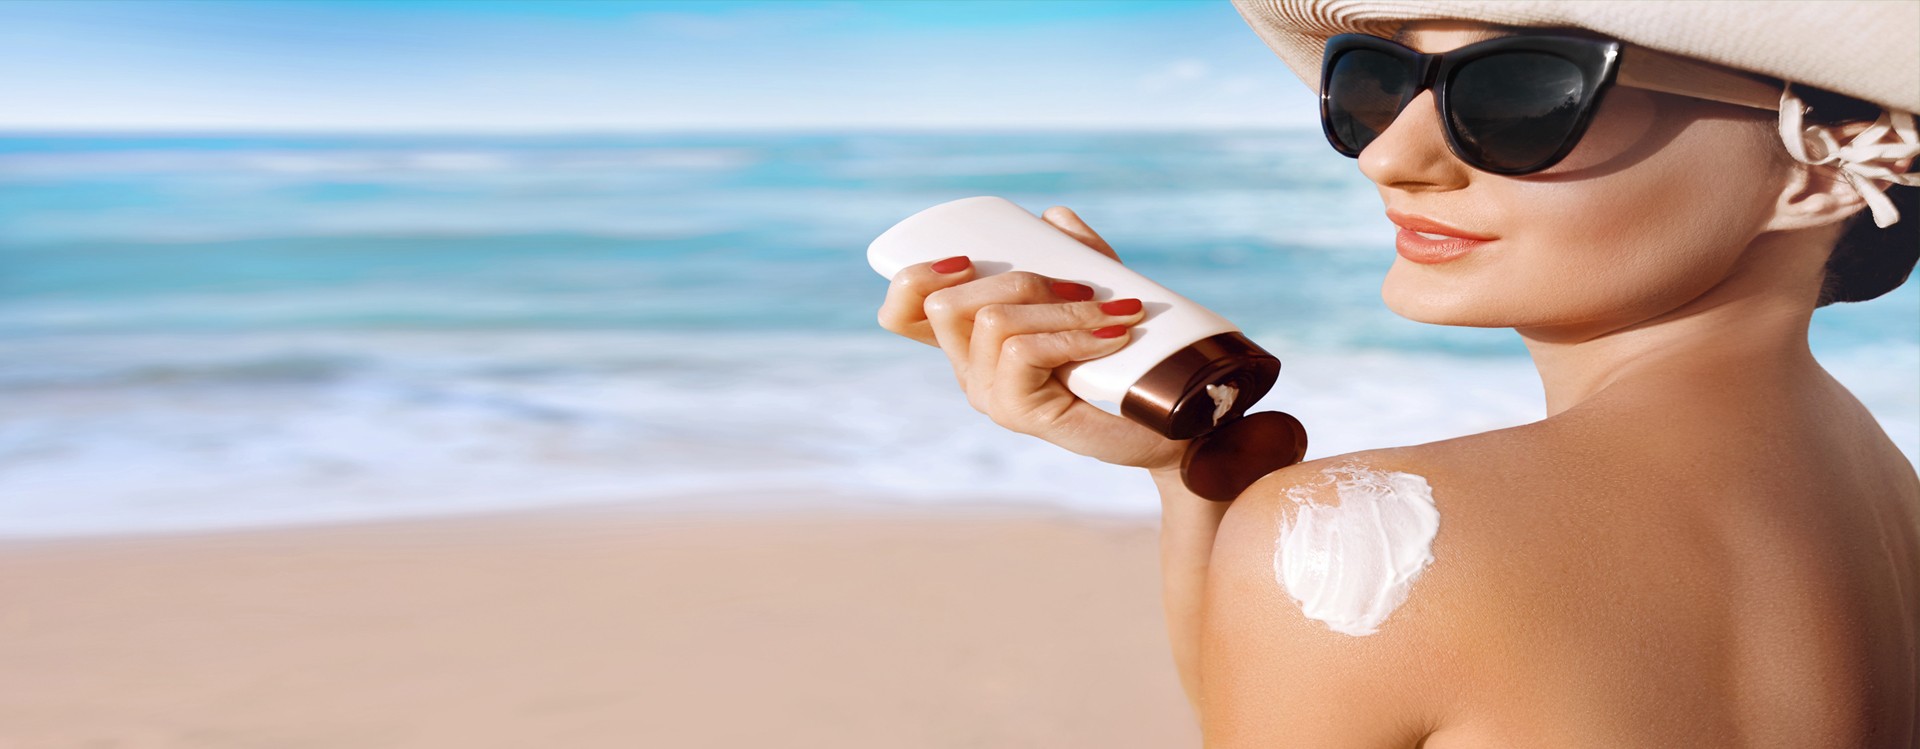 sun protection, holiday tanning cream